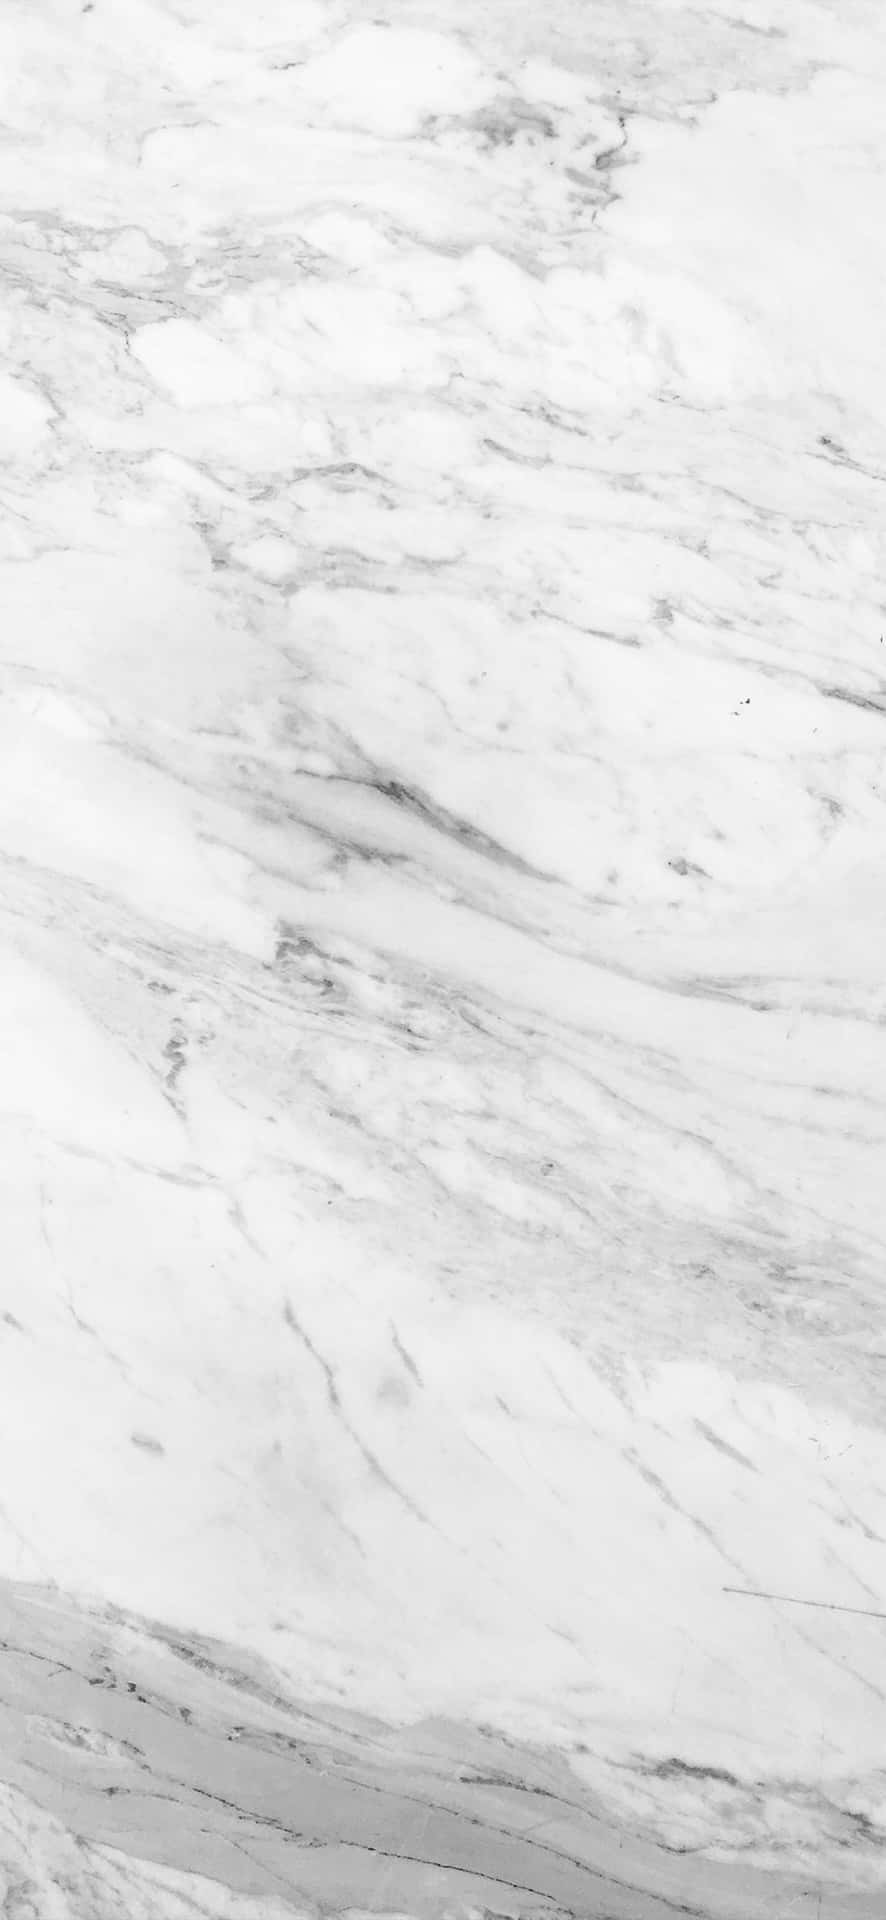 Get the newest Marble Phone and stay stylish Wallpaper